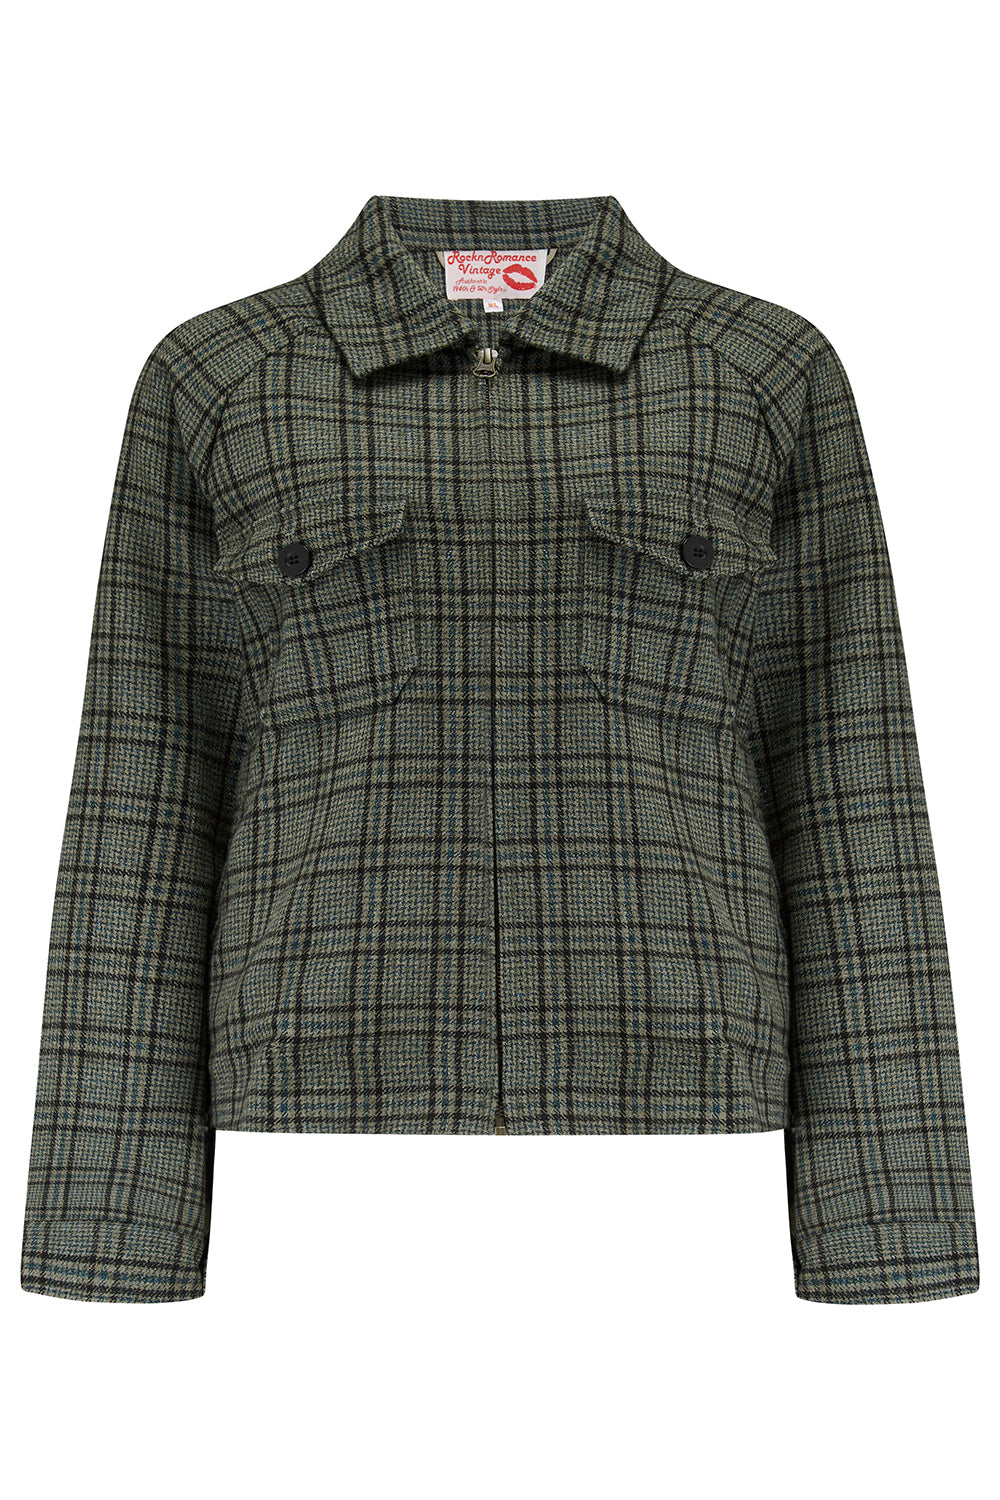 The "Bobby Jacket" in Woven Gray/Brown Check Wool With Luxury Satin Lining, Classic Rockabilly Style